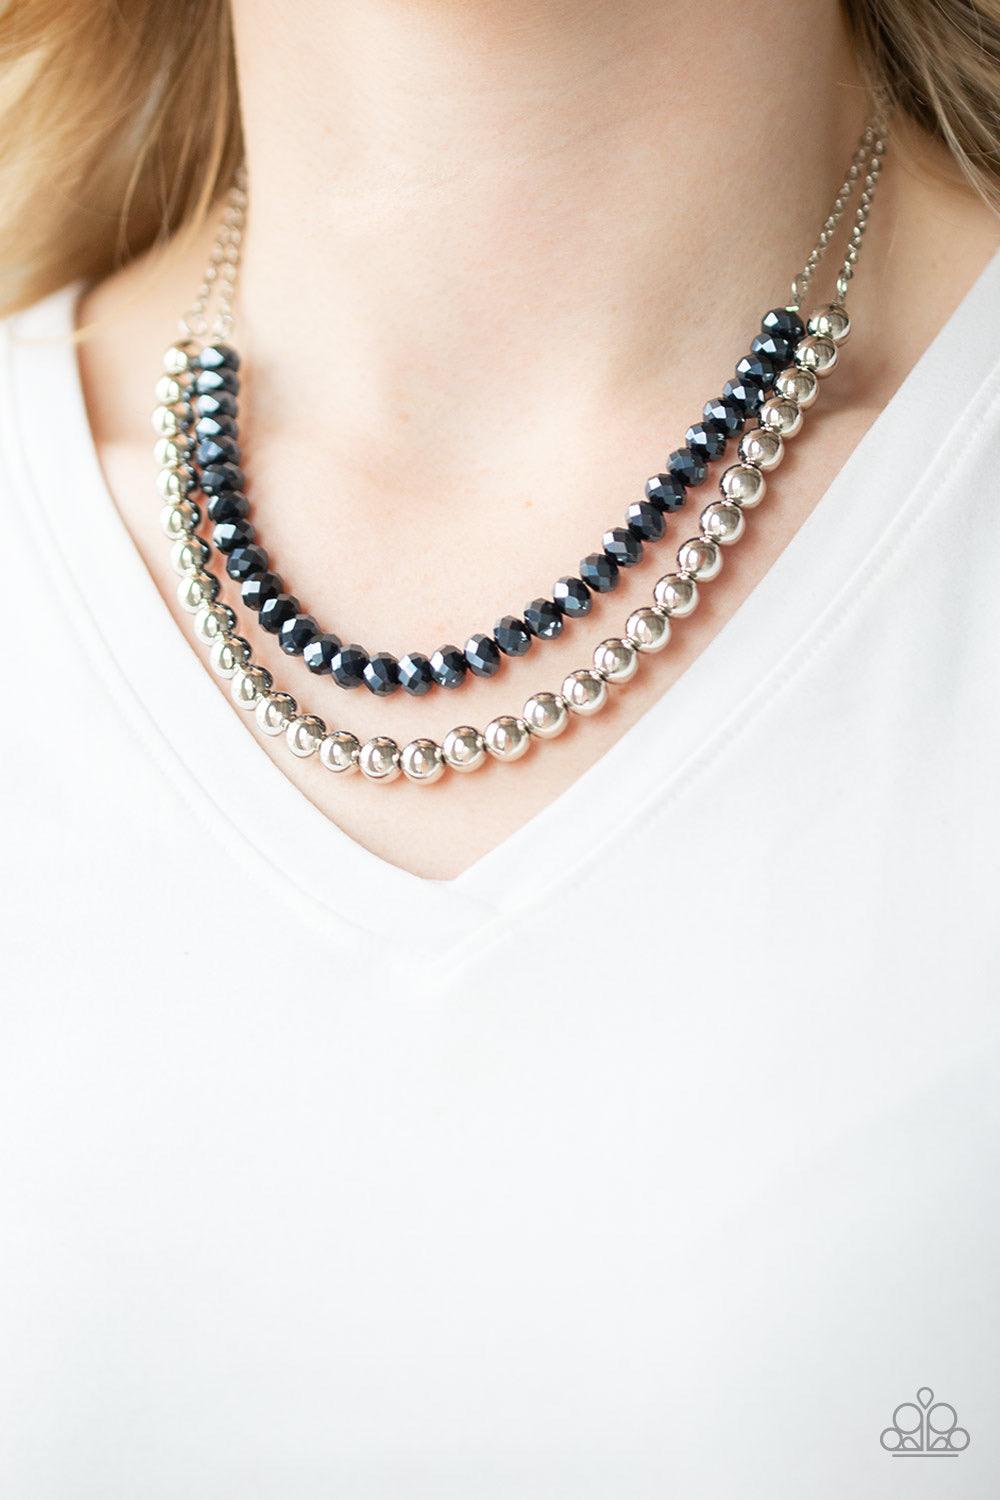 Paparazzi Accessories Color of the Day - Blue Dipped in a metallic shimmer, a strand of glittery blue crystal-like beads gives way to a strand of shiny silver beads below the collar for a colorfully layered look. Features an adjustable clasp closure. Jewe